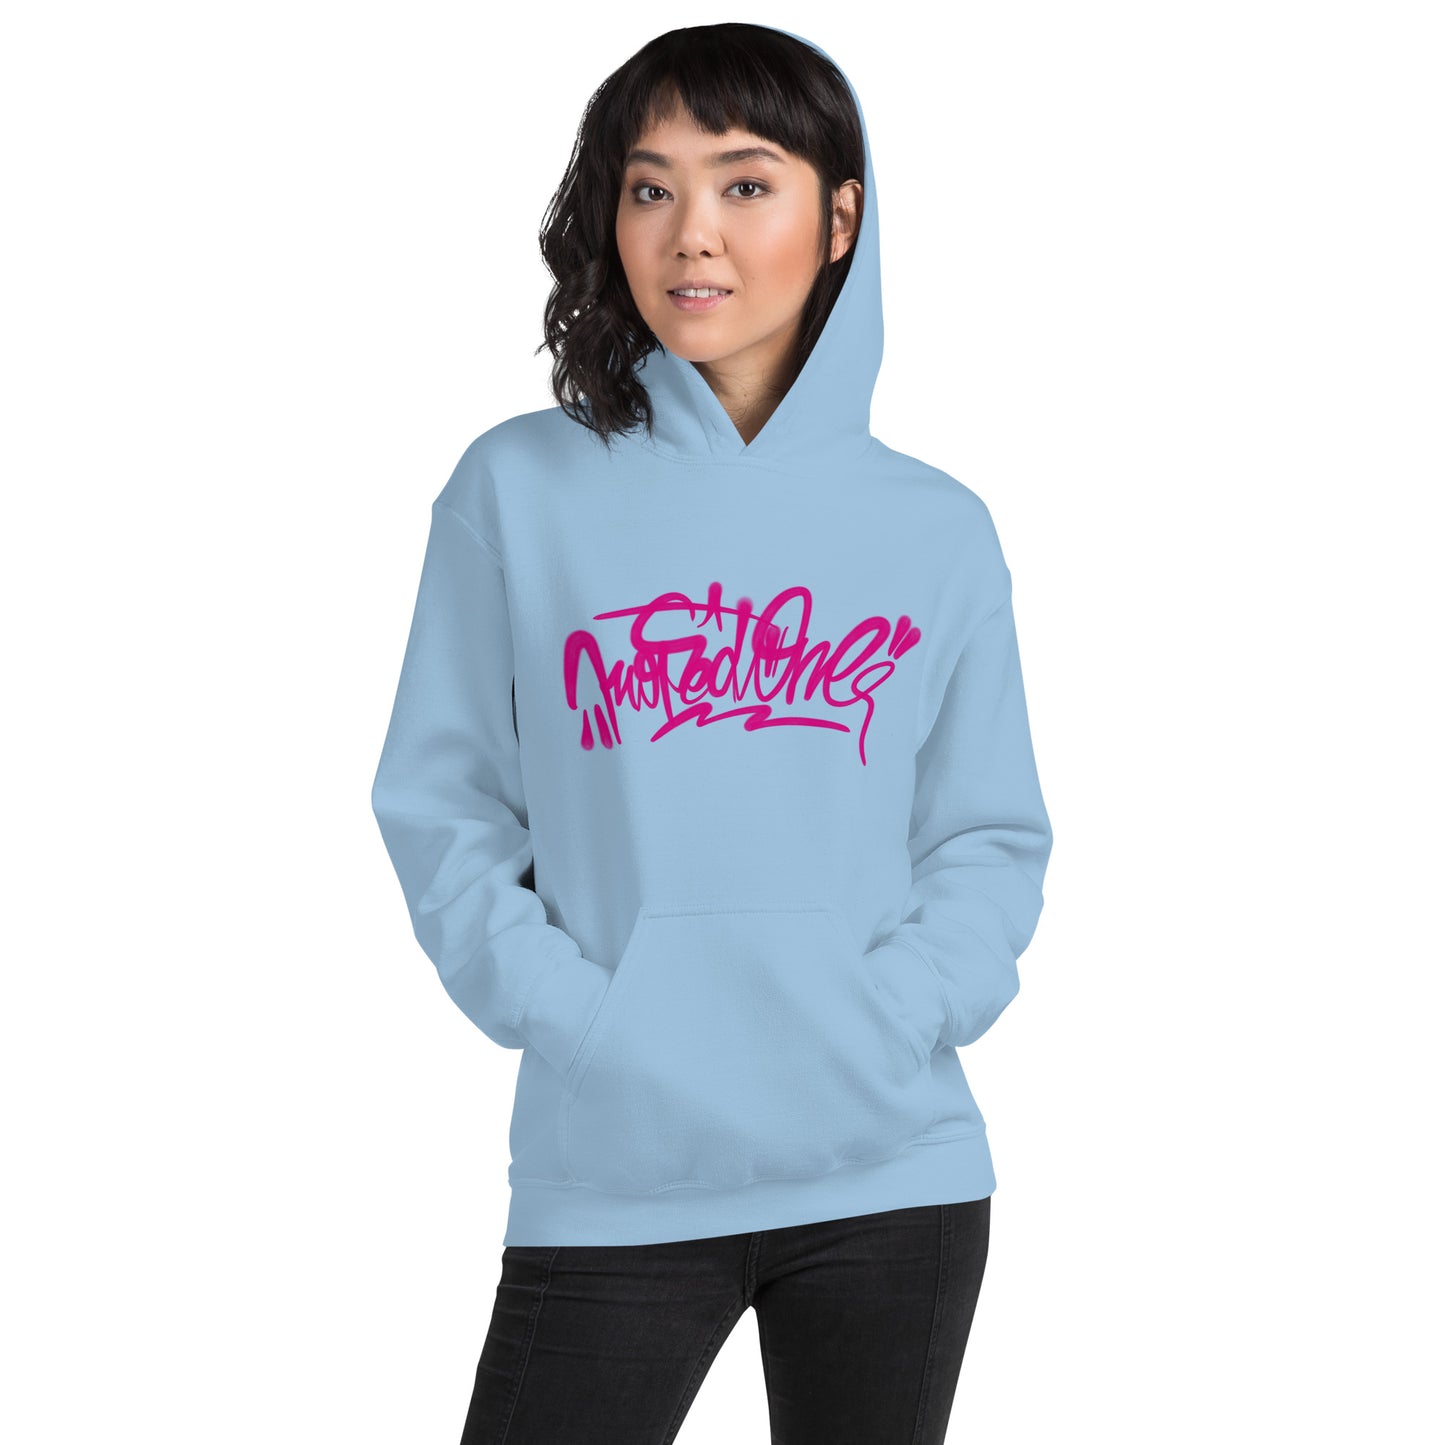 Moped-one loose fit unisex Hoodie blue